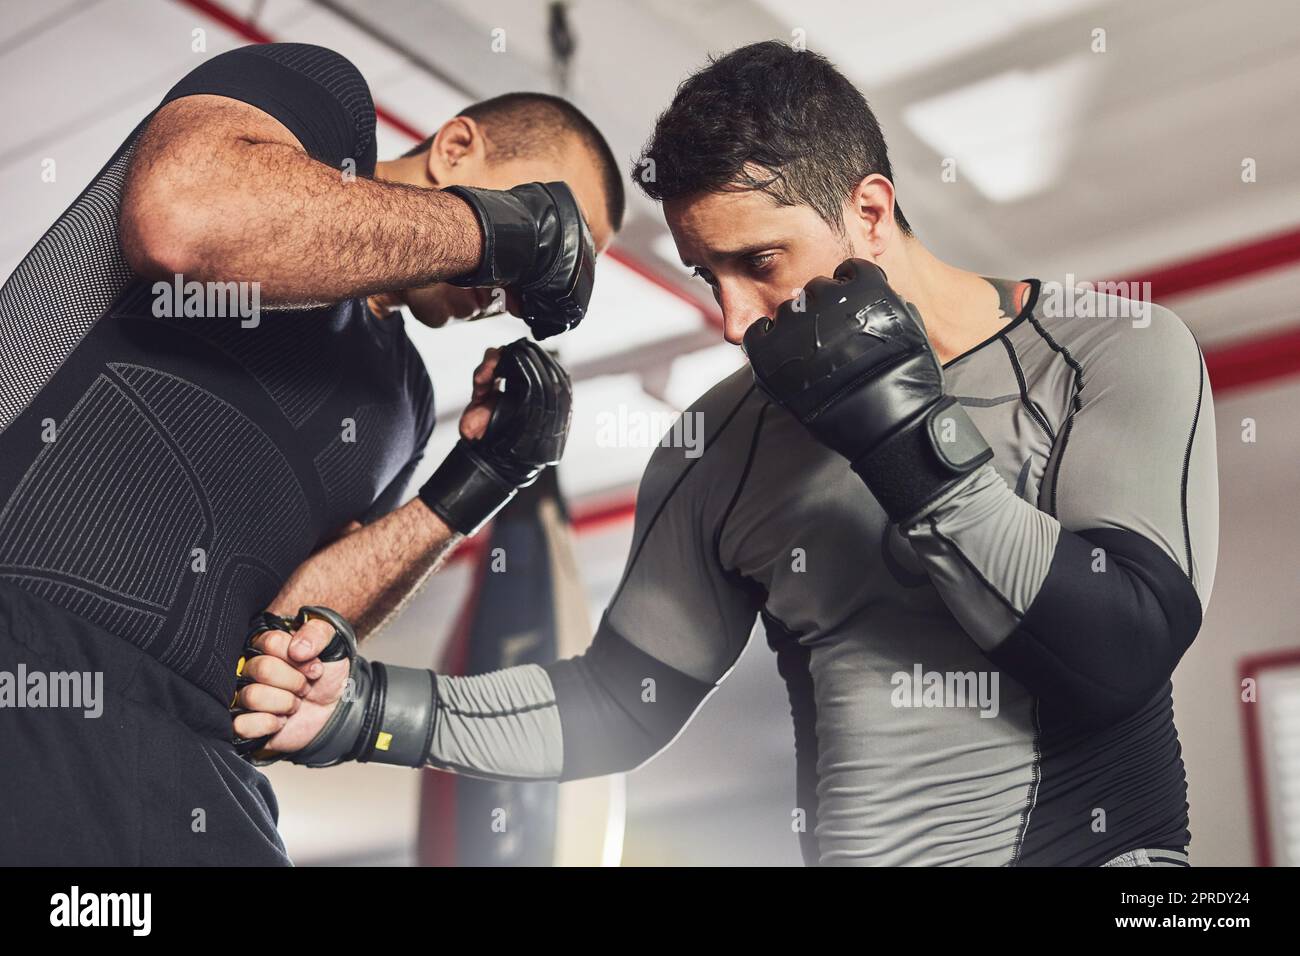 Body shots. two professional fighters sparring in the gym. Stock Photo